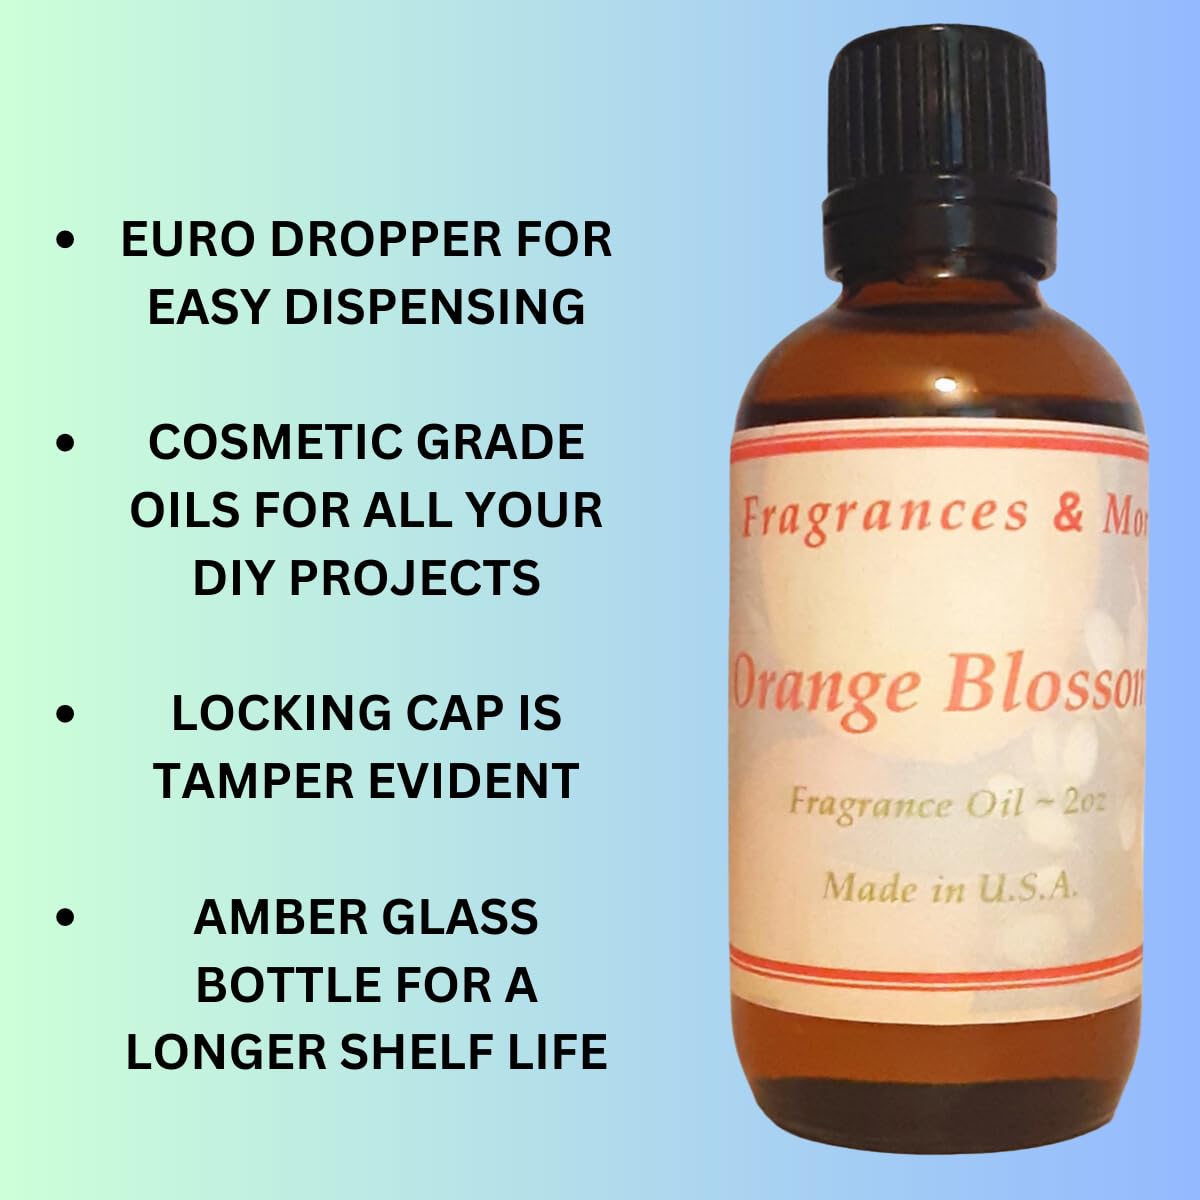 Fragrances & More Orange Blossom Scented Oil - Premium Fragrance Oil to Enhance Soap & Candle Making, Bath & Body Products, Home & Office Scents & Diffuser Aromatherapy - 2oz (60ml) Amber Glass Bottle